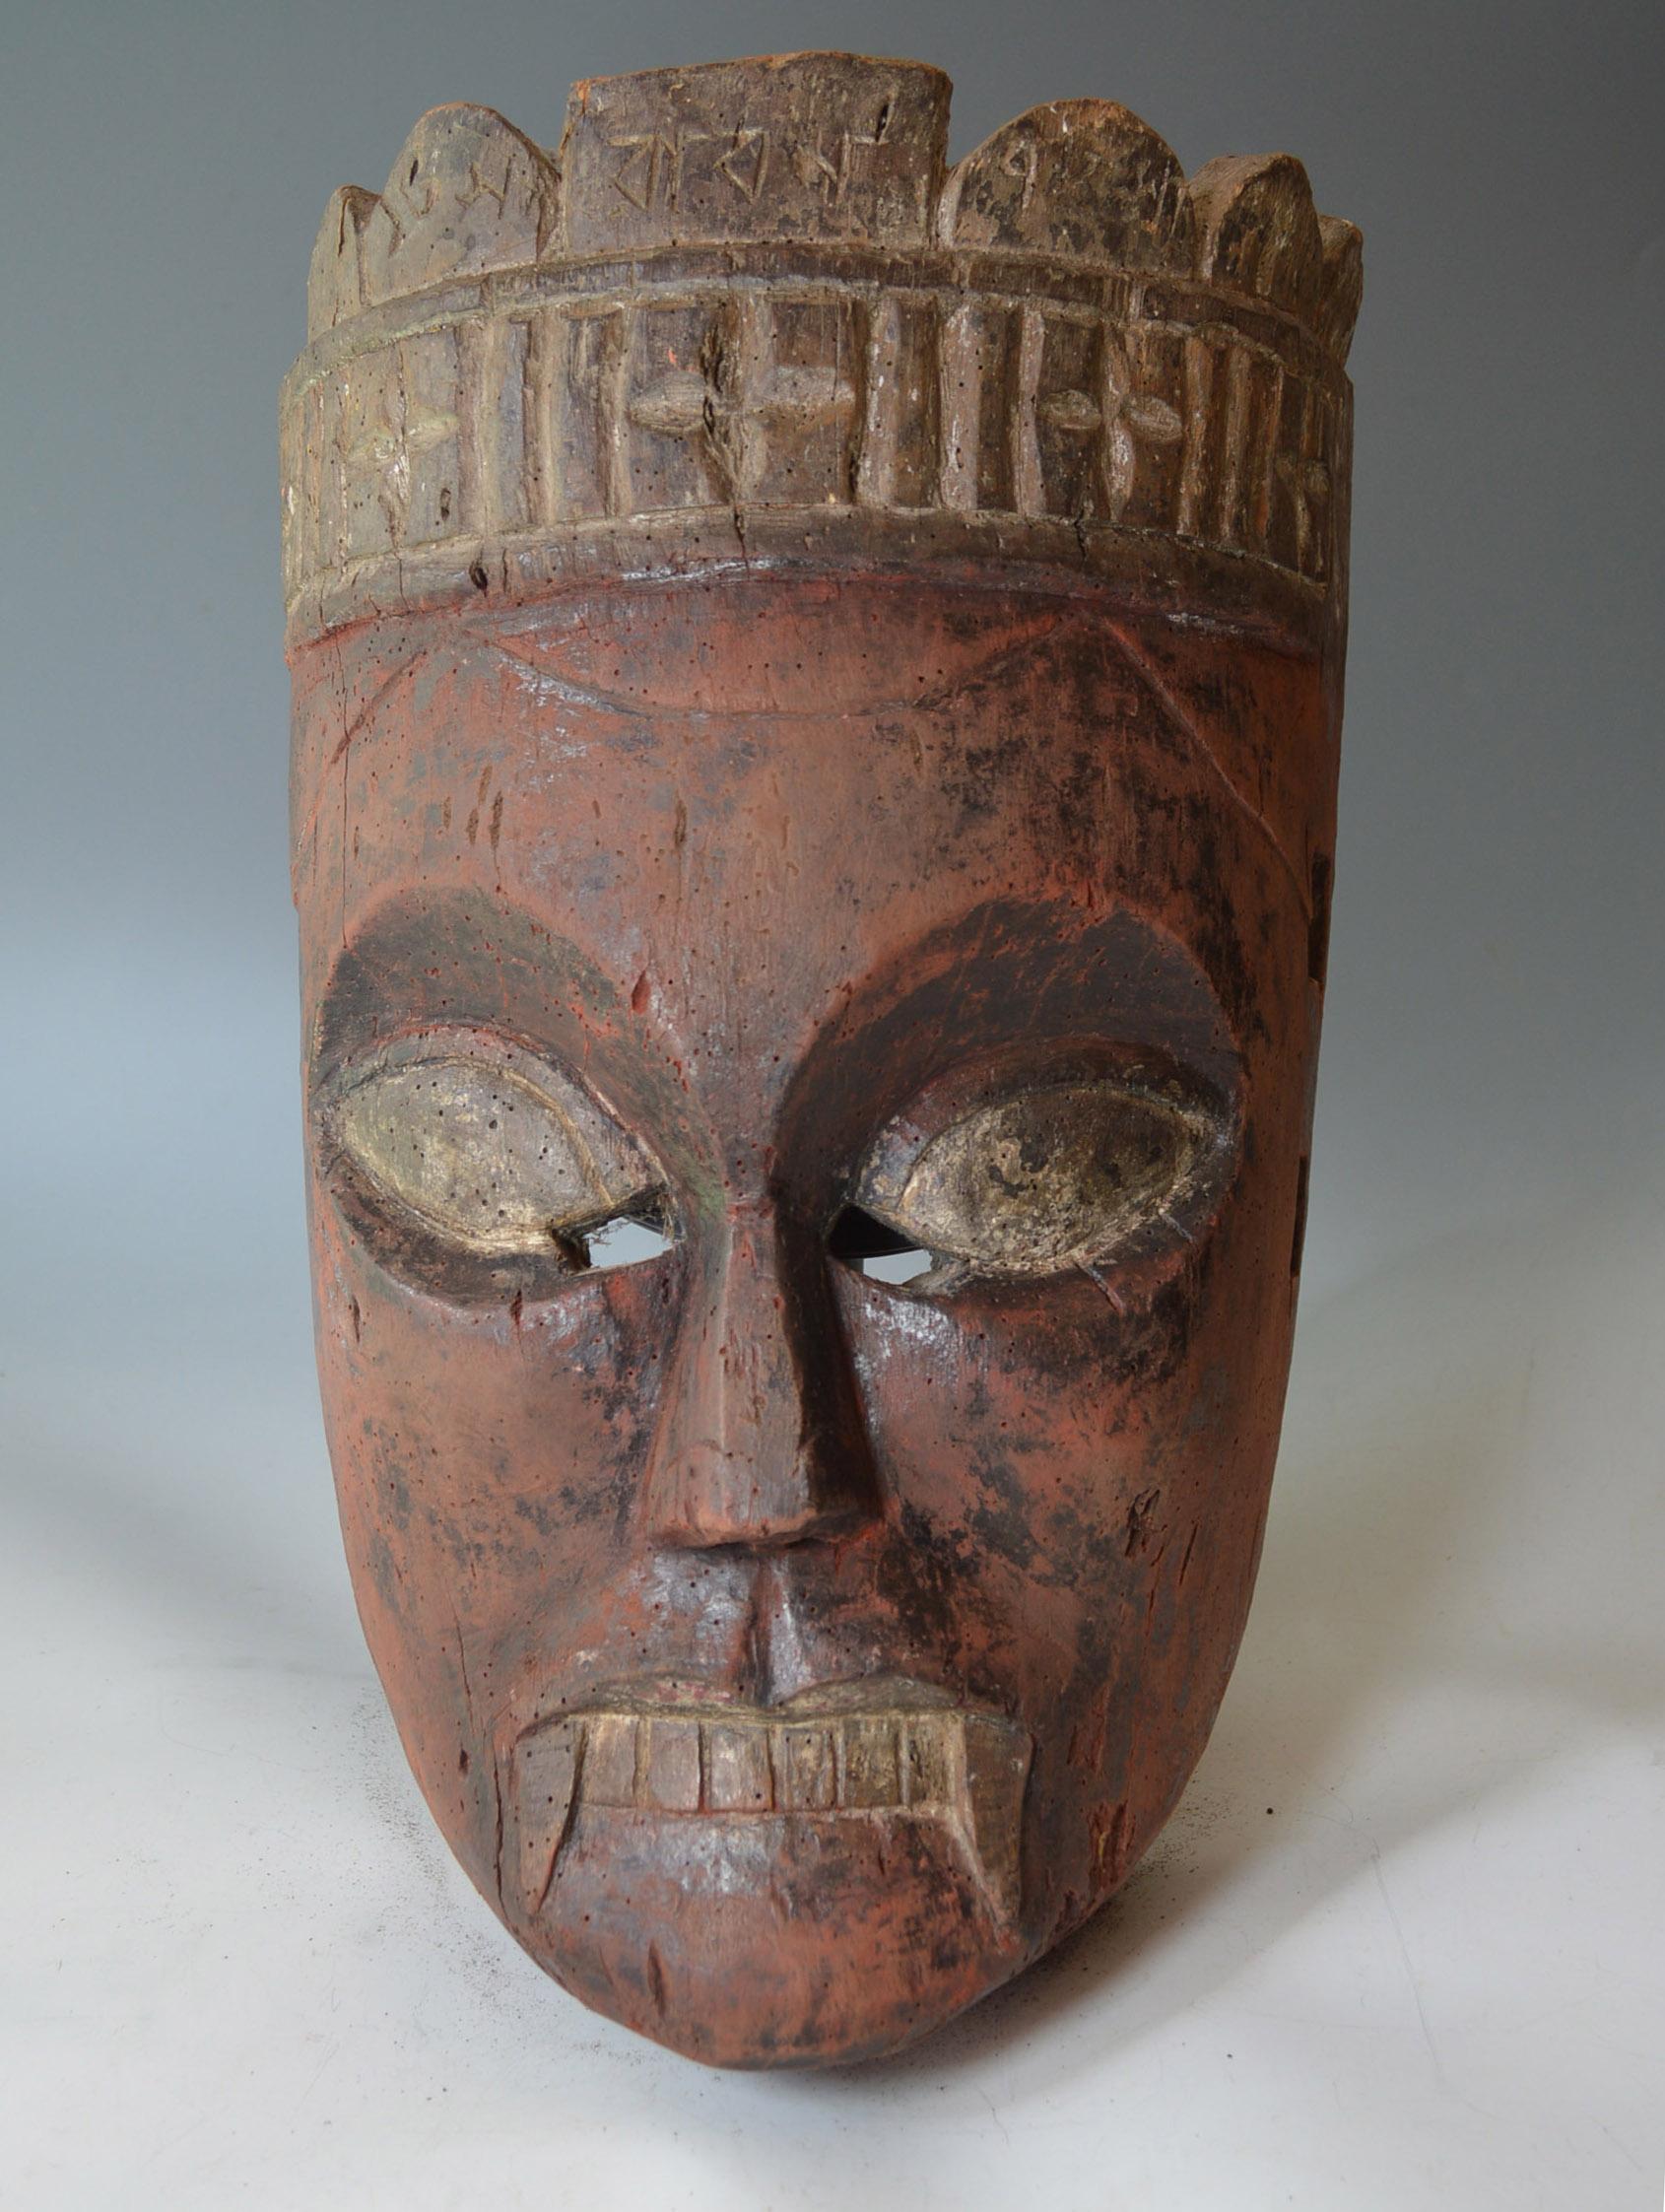 A old Nepalese ritual festival mask of kali,
These type of masks are used in the Durga puja festivals and represents Kali a aspect of the god Durga,
Period early 20th century, from a Uk collection.
Hard wood with poly-chrome paint
Size: 42 x 25